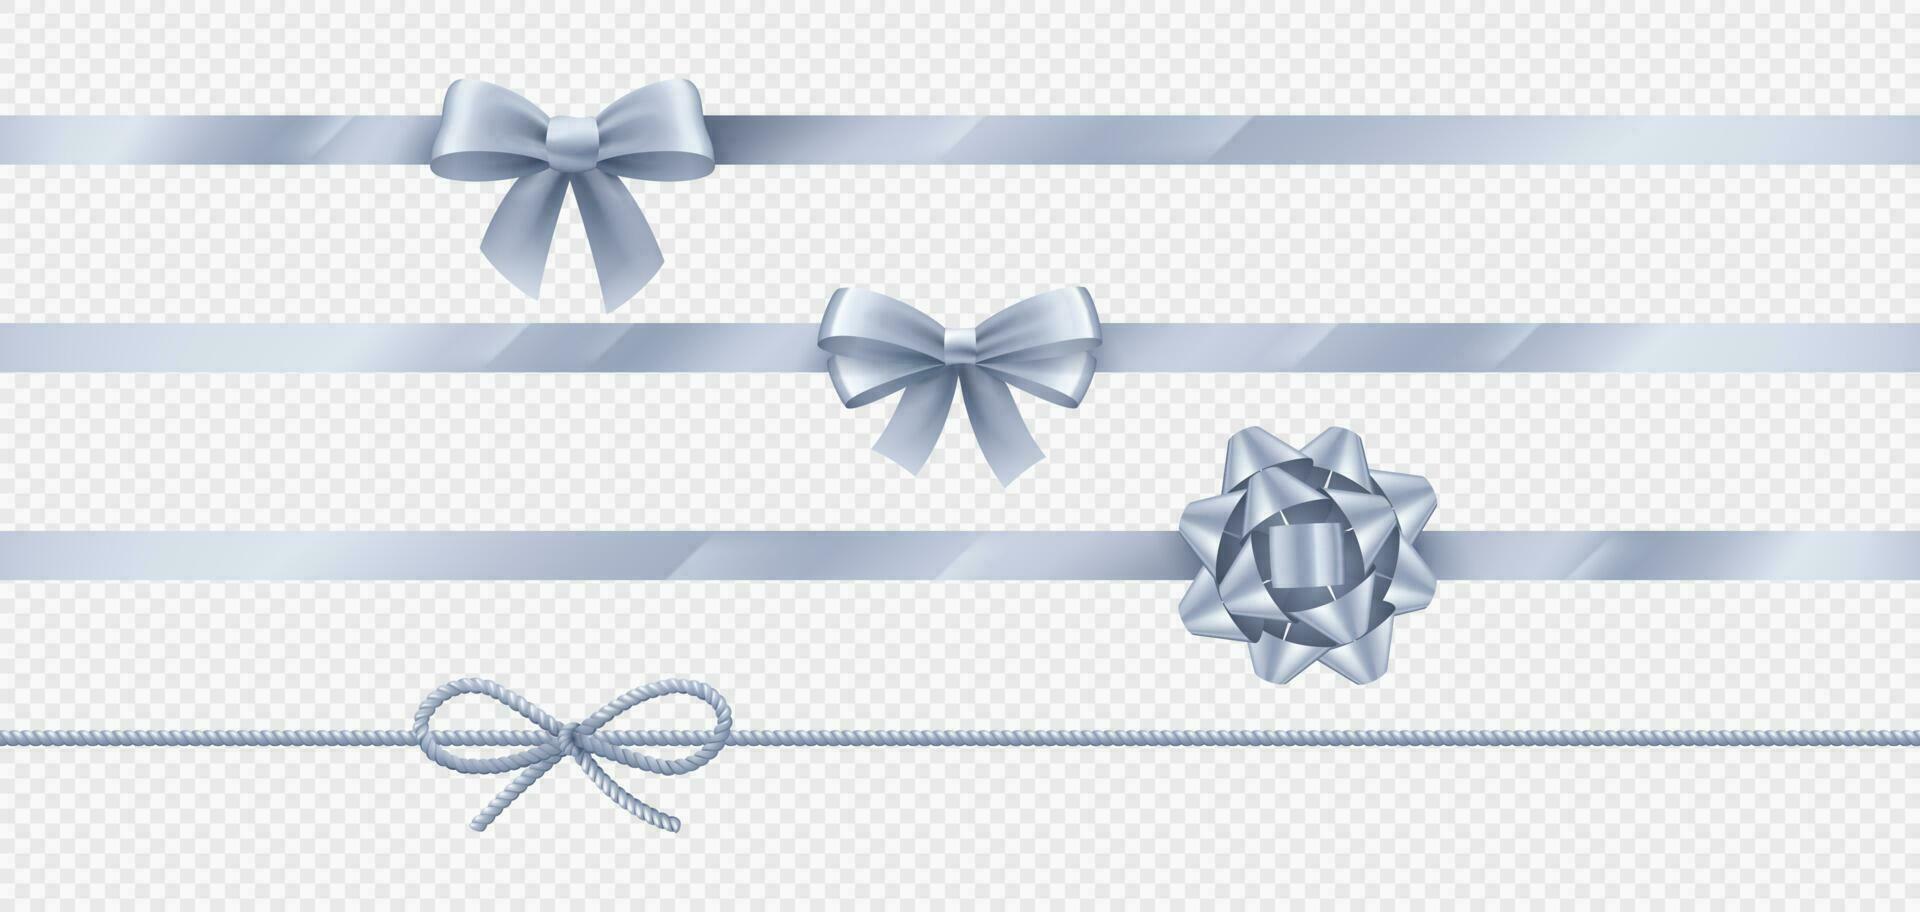 Isolated realistic silver ribbon gift bow knot vector